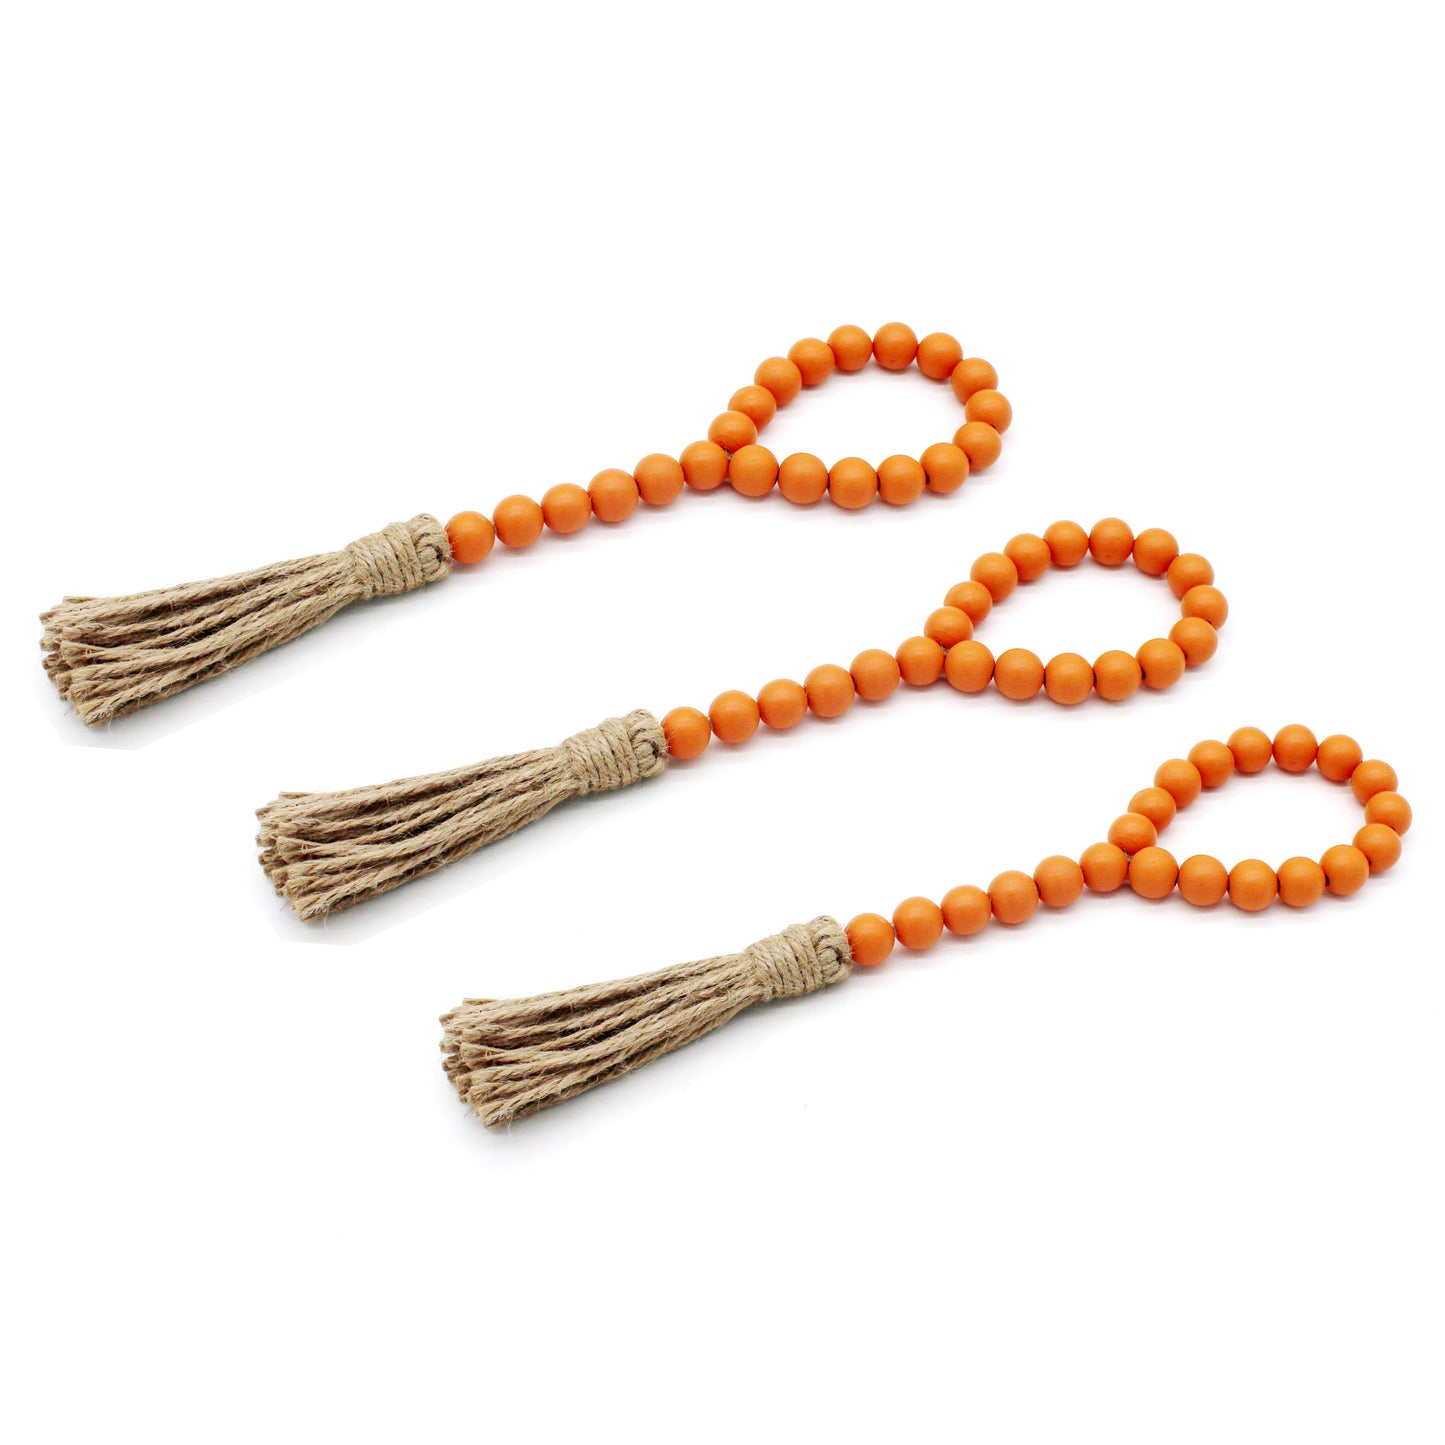 CVHOMEDECO. Wood Beads Garland with Tassels 3 PCS Farmhouse Rustic Wooden Prayer Bead String Walls Hanging Accent for Home Festival Decoration. Orange